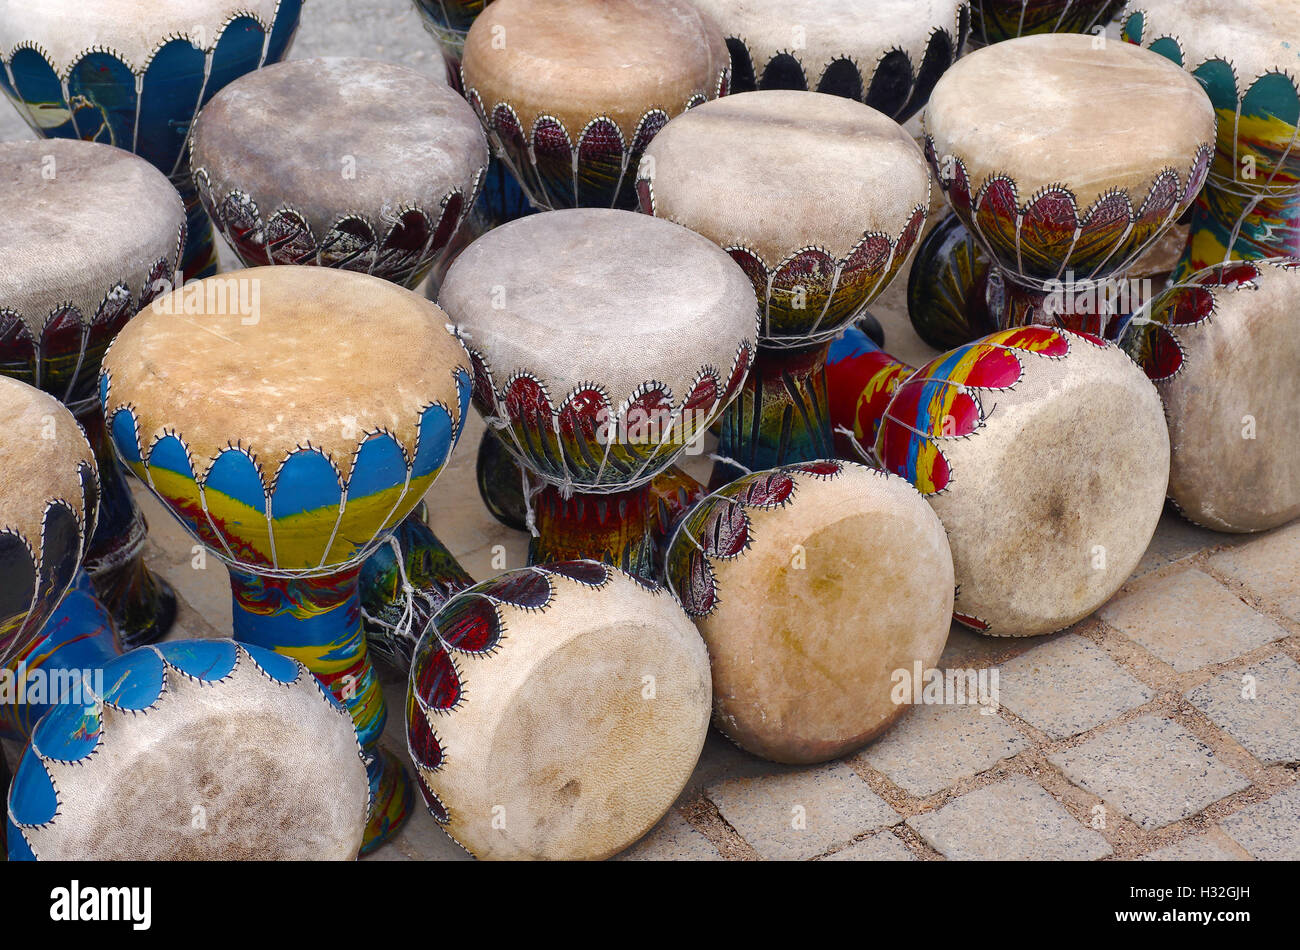 Many colorful congas or hand-drums for sale in a handicraft market Stock Photo